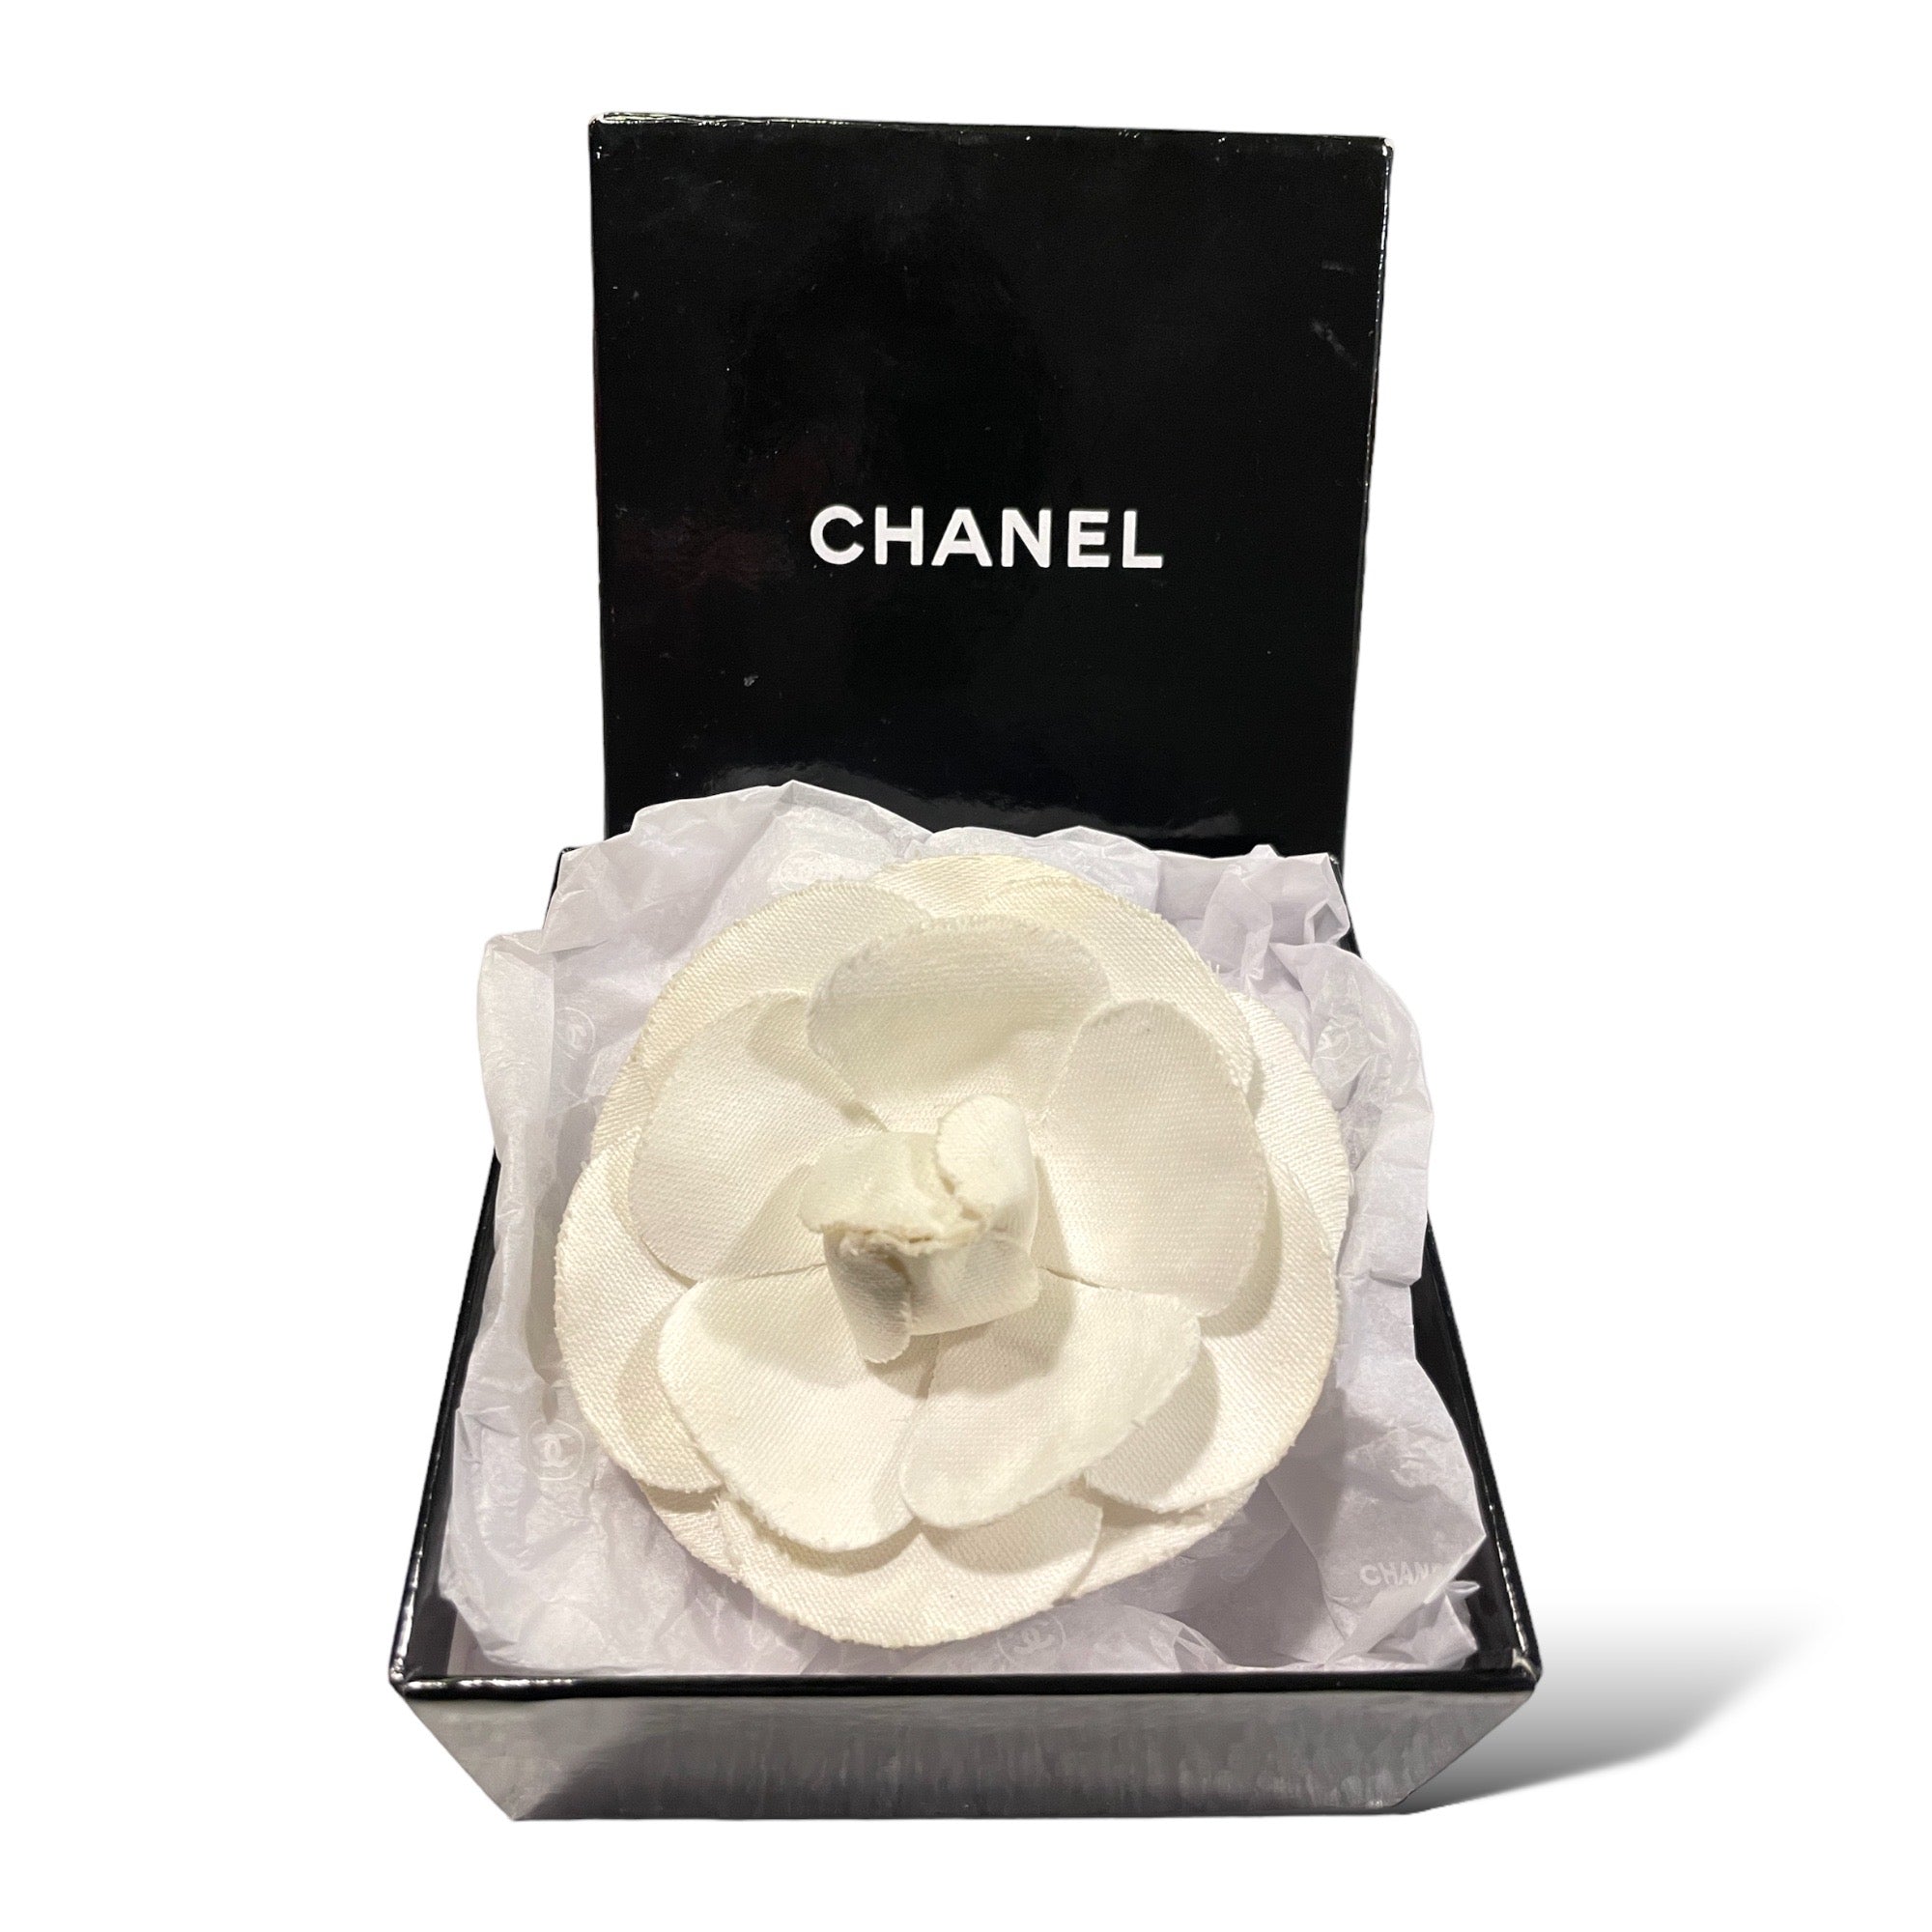 CHANEL WHITE CAMELLIA FLOWER PIN BROOCH IN ORIGINAL CHANEL GIFT BOX